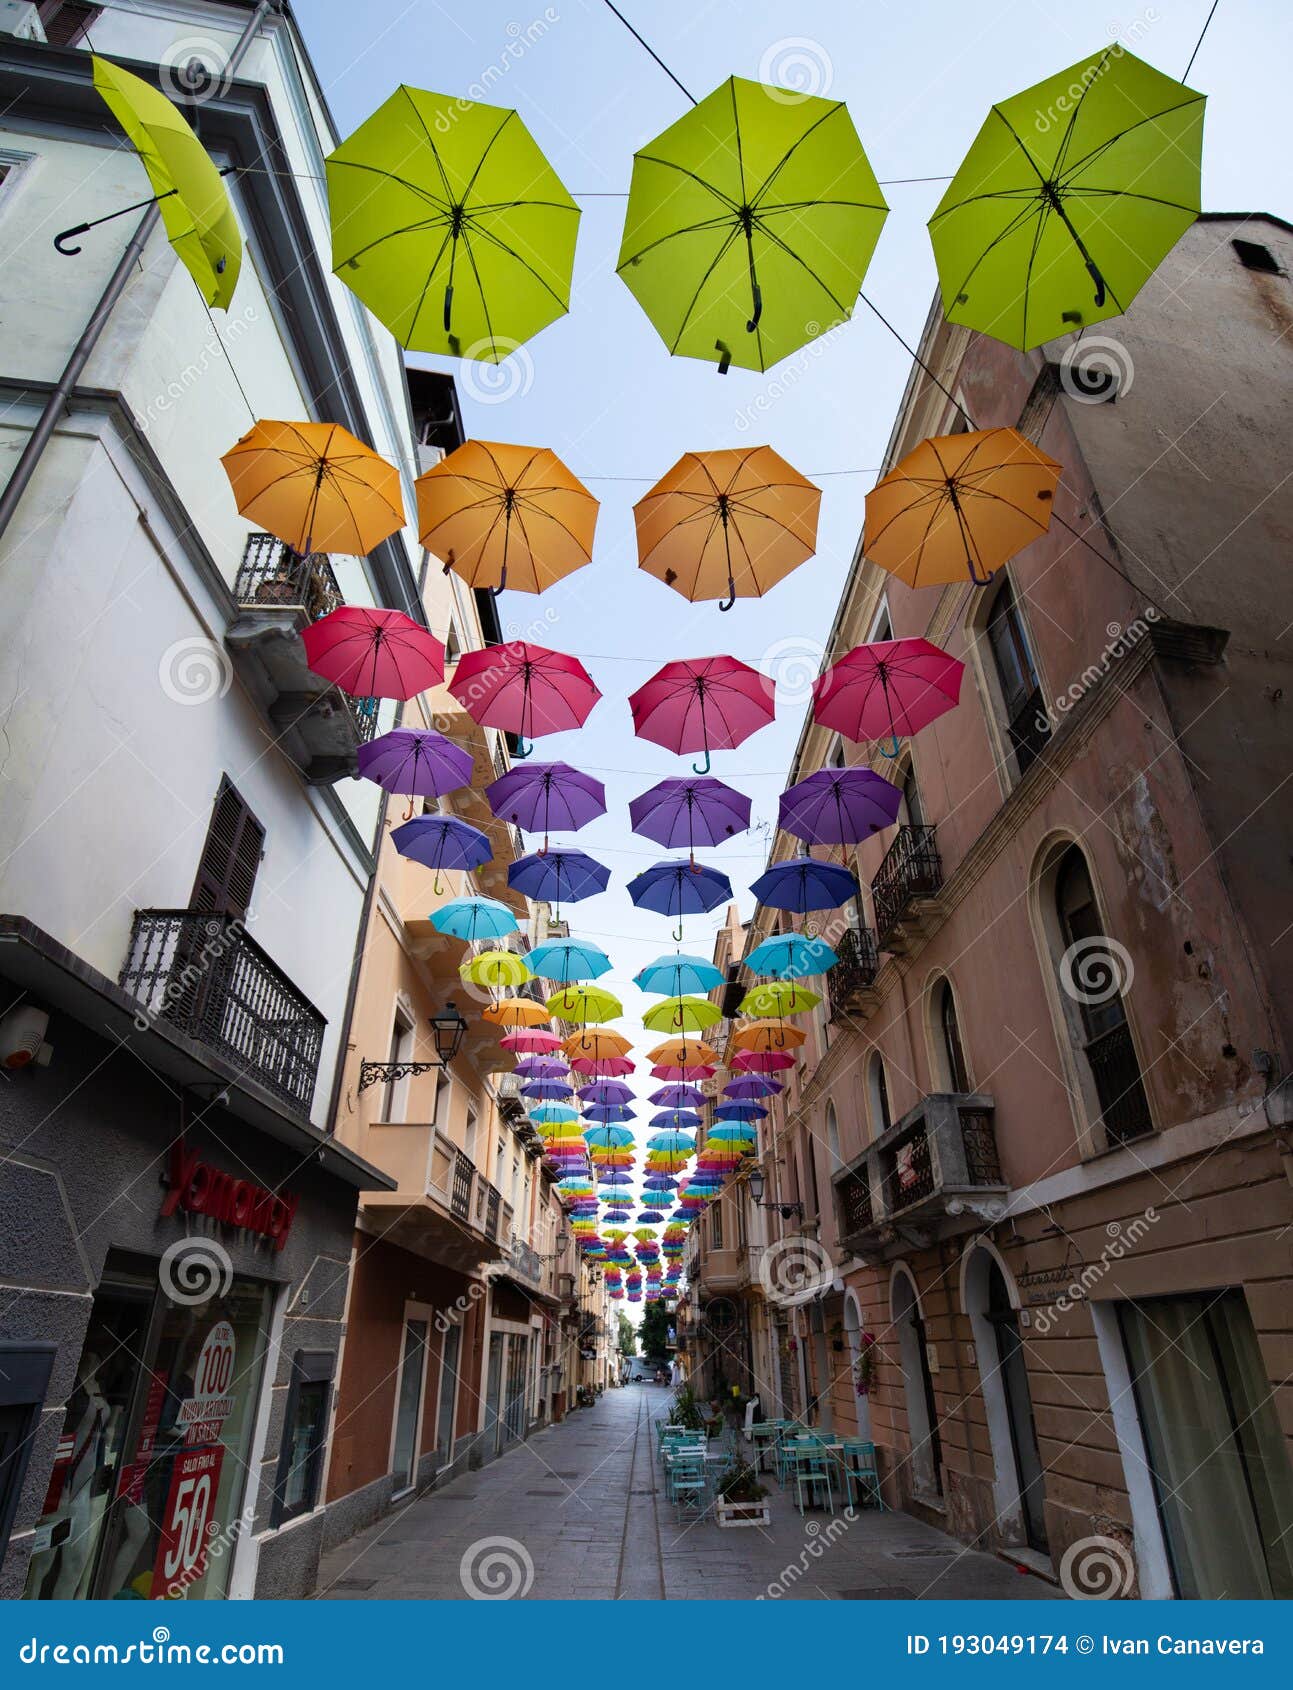 iglesias, italy: colorful umbrellas hanging over a street in old iglesias city in a sunny day